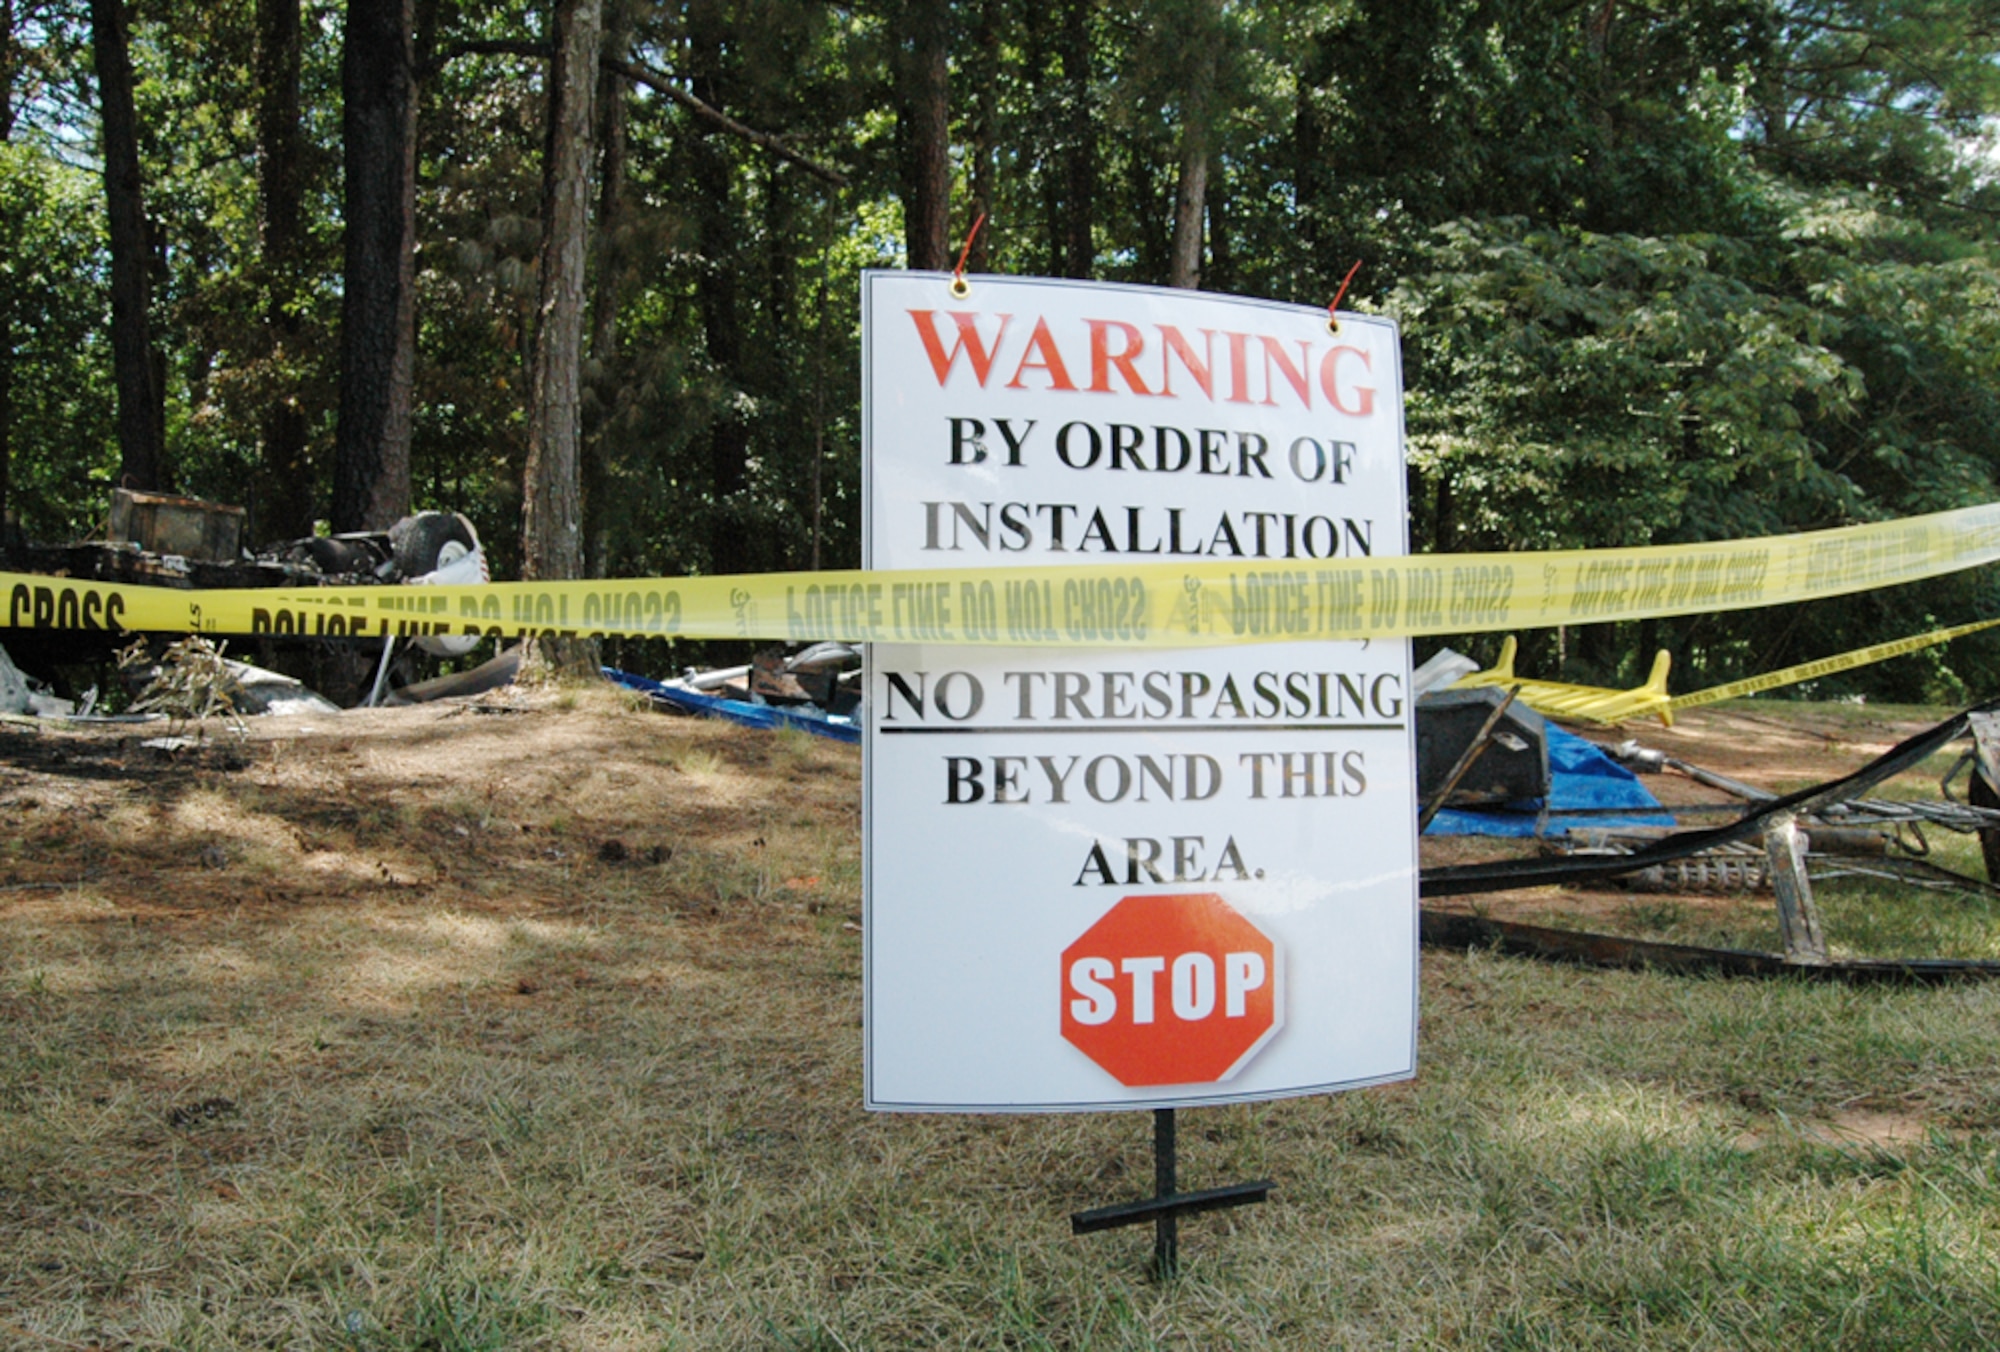 Police tape and a warning sign mark off the area where a recreational trailer caught on fire around 2:30 a.m. July 17. Nearly a dozen firefighters extinguished the blaze, which caused $30,000 in damages. The cause is currently under investigation. (U.S. Air Force photo/Travon Dennis)